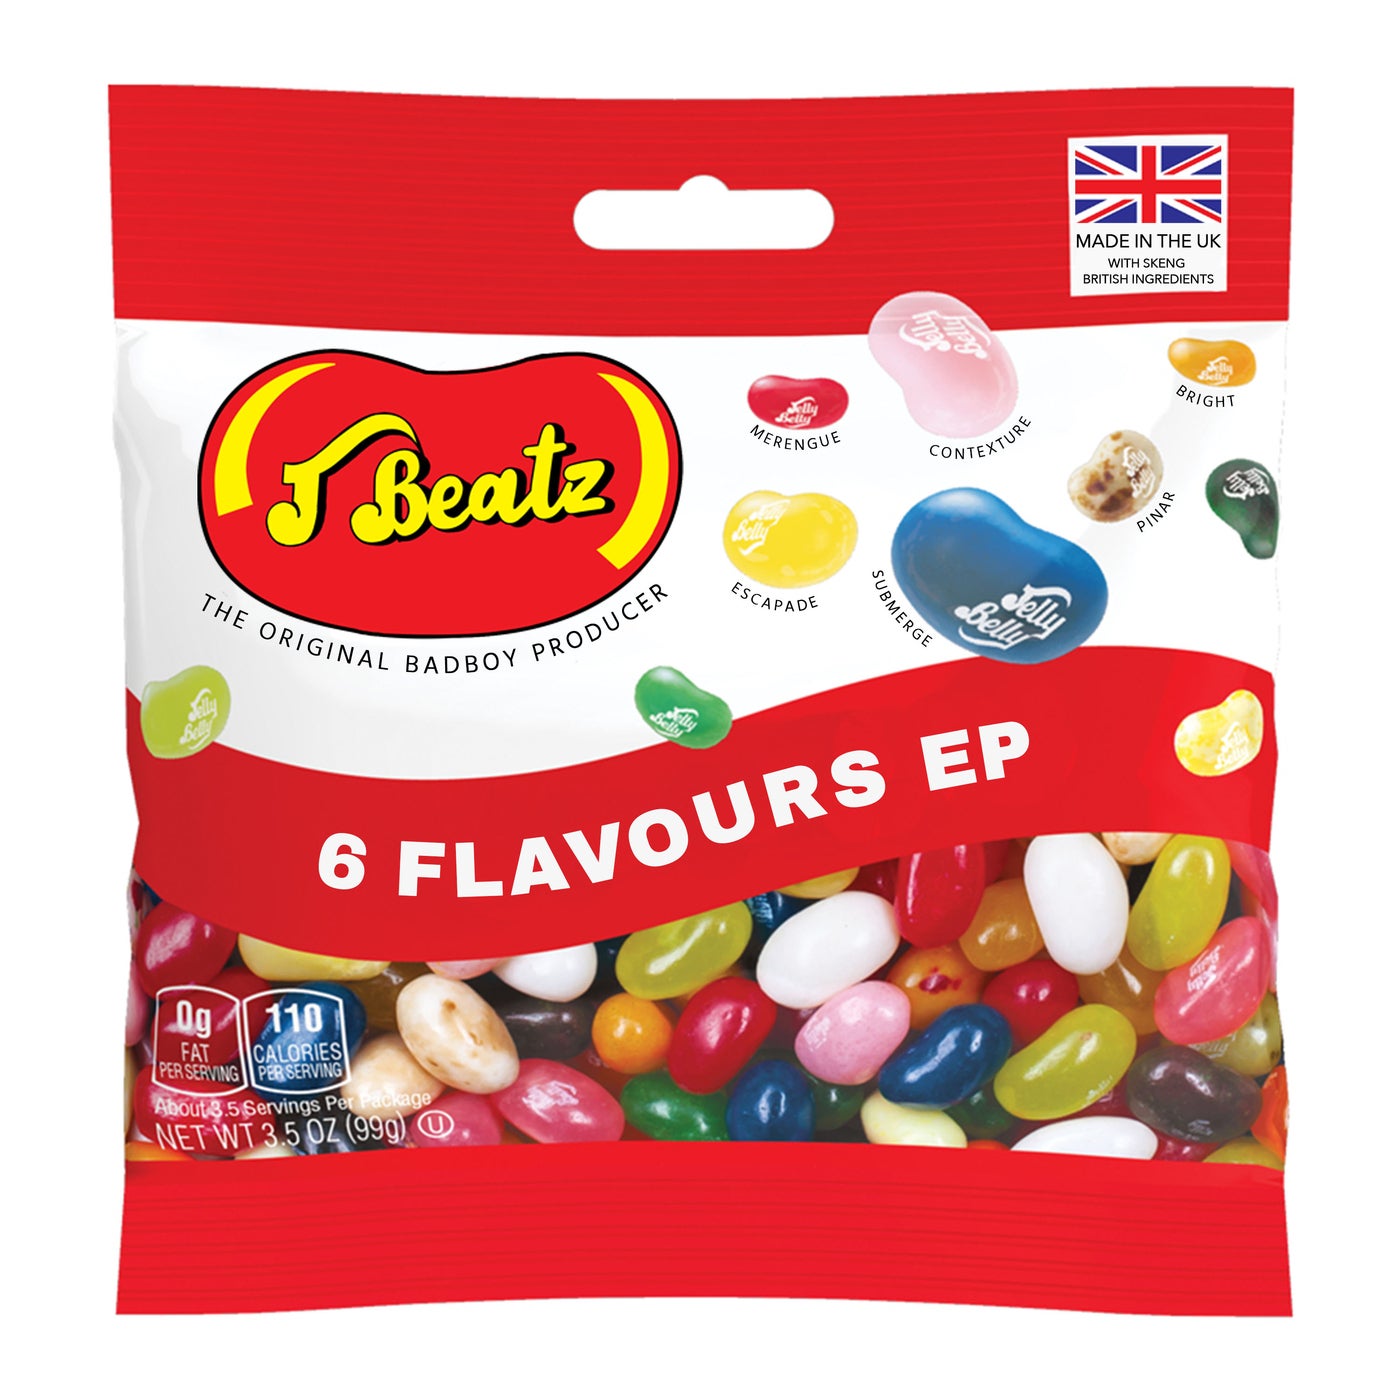 6 Flavours EP